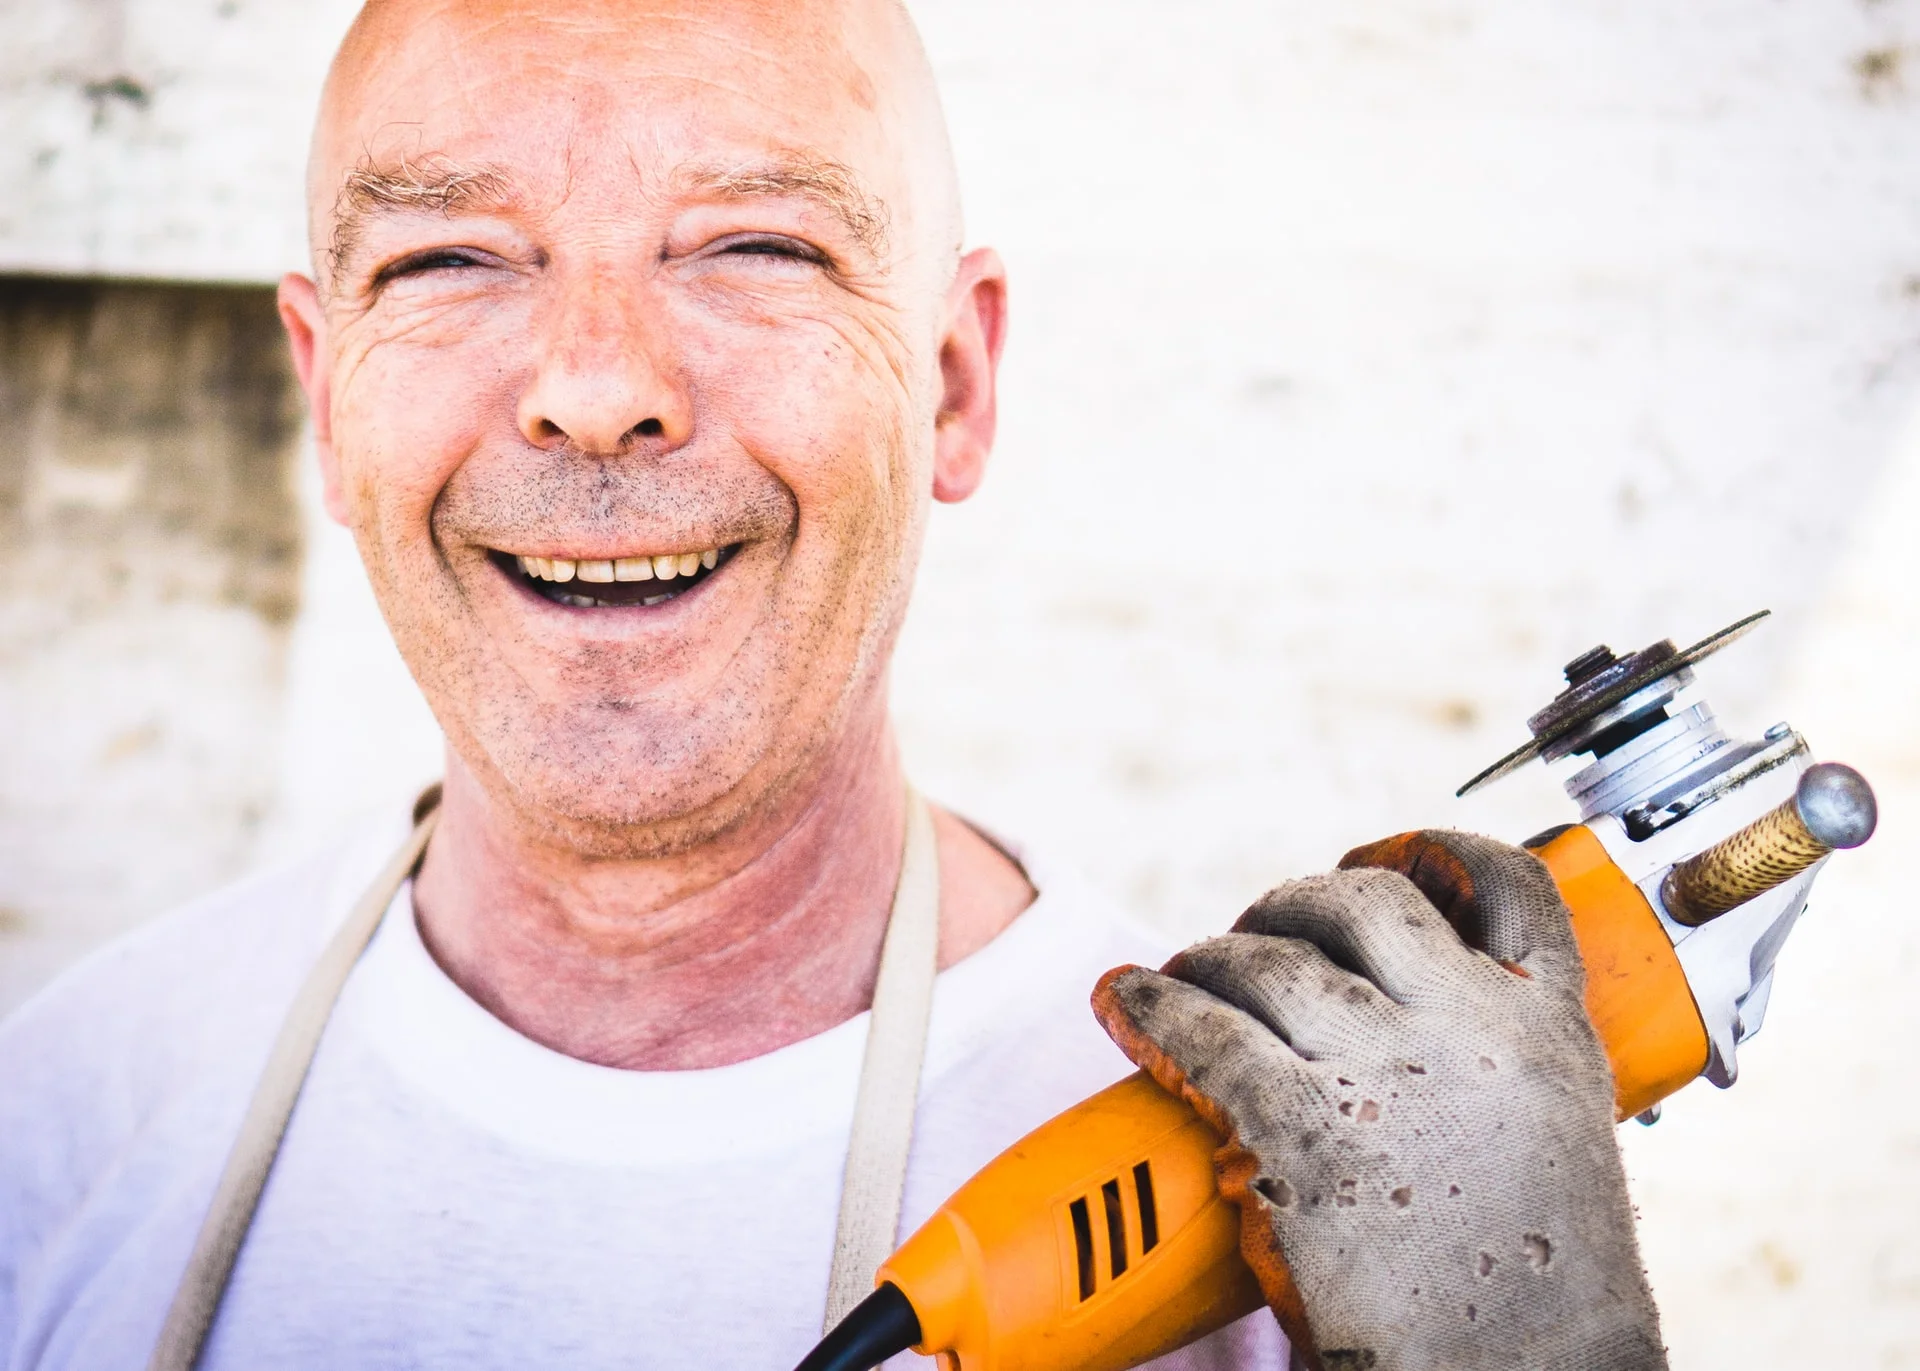 a man smiling with a drill